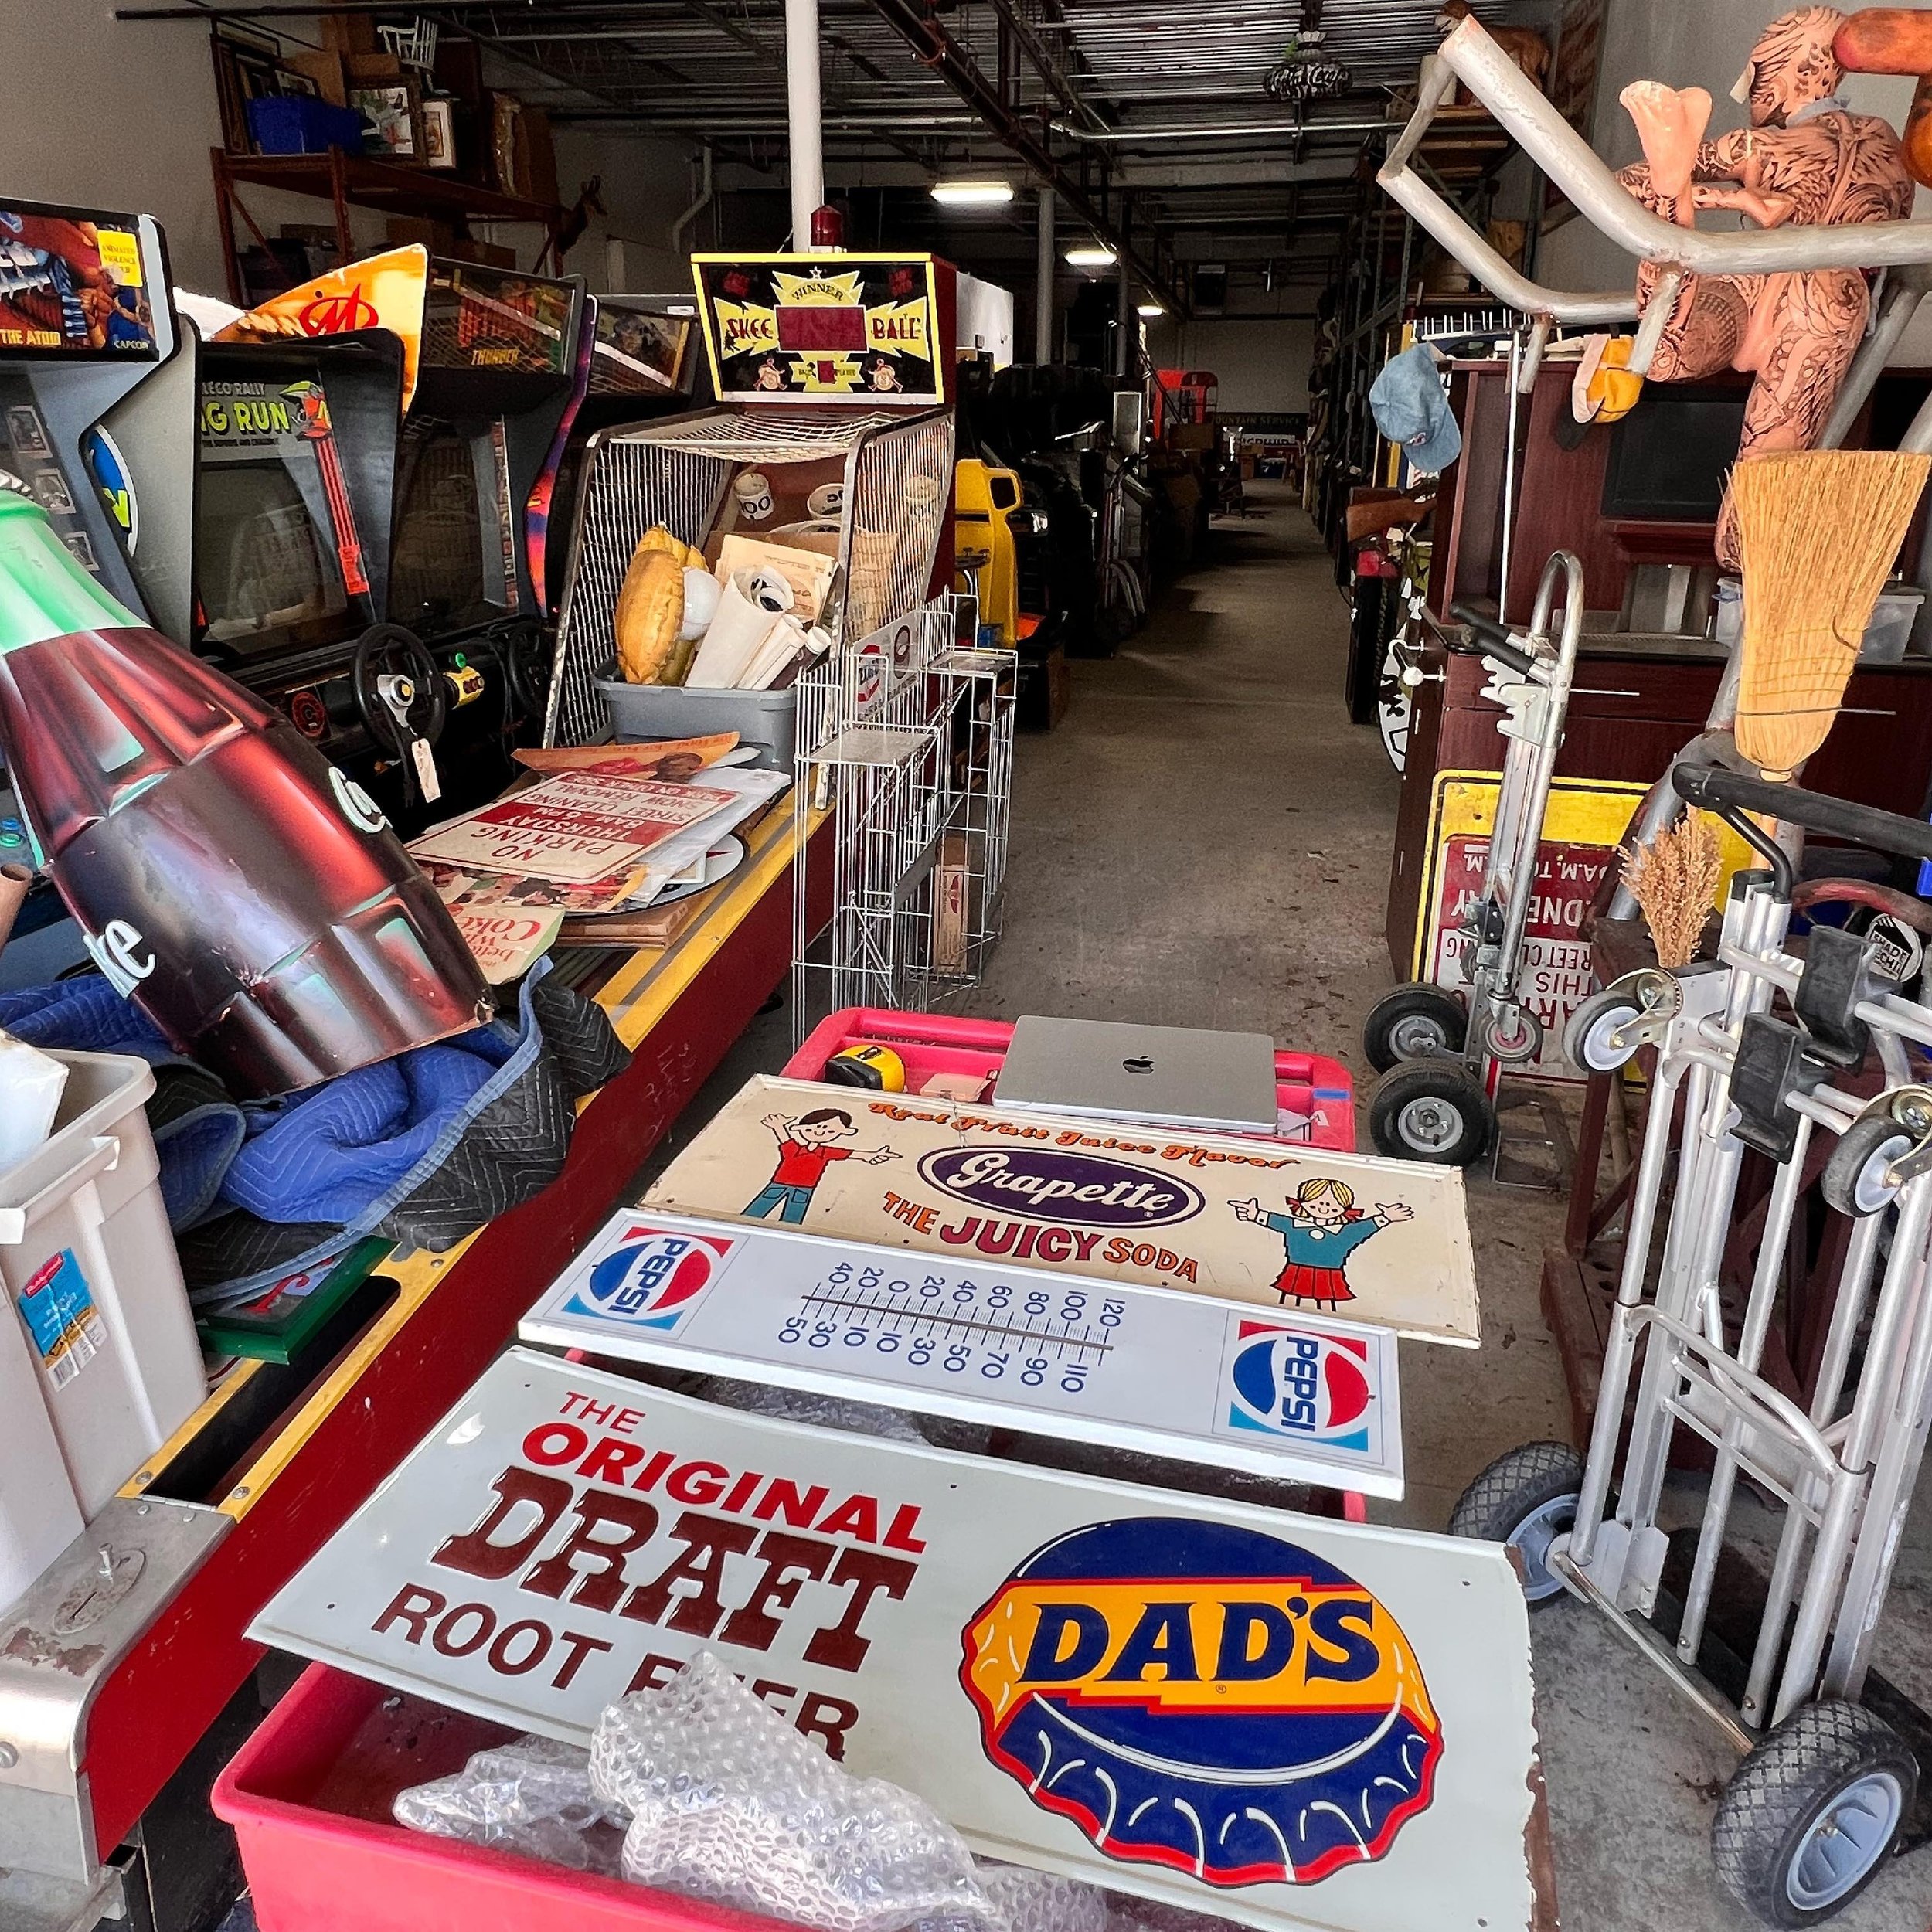 🚨 NEW UPLOAD ALERT 🚨Our April Auction is now over 500 items! Check it out - link in bio to register and bid. 
.
#vintageadvertisingsigns #skeeball #gameroom #coinop #arcade #pinballmachines #onlineauctions #jaybirdauctions